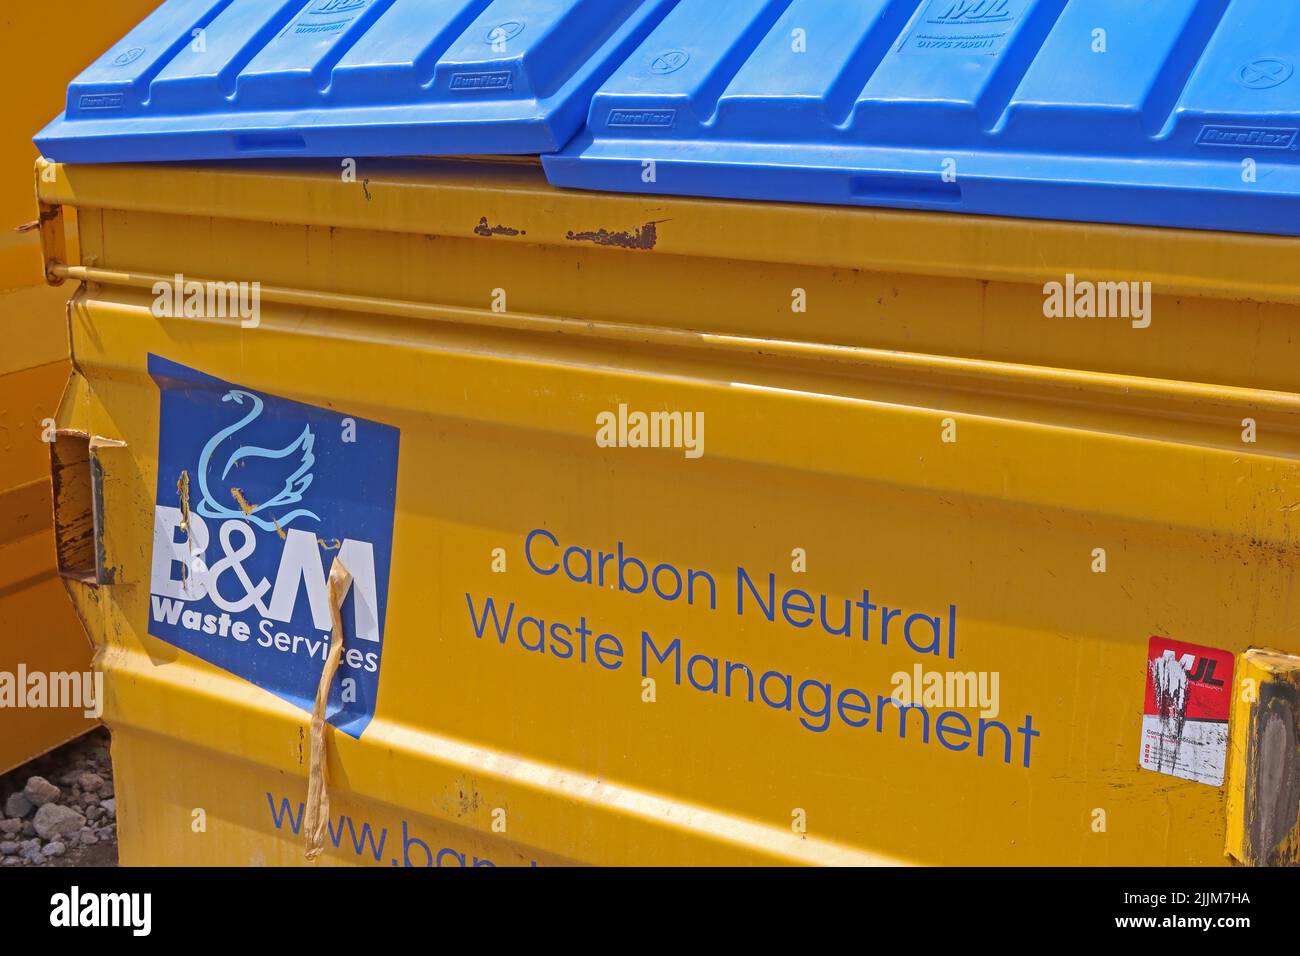 B&M waste services - Carbon Neutral Waste management skip. Can businesses really be Carbon Neutral ? Stock Photo